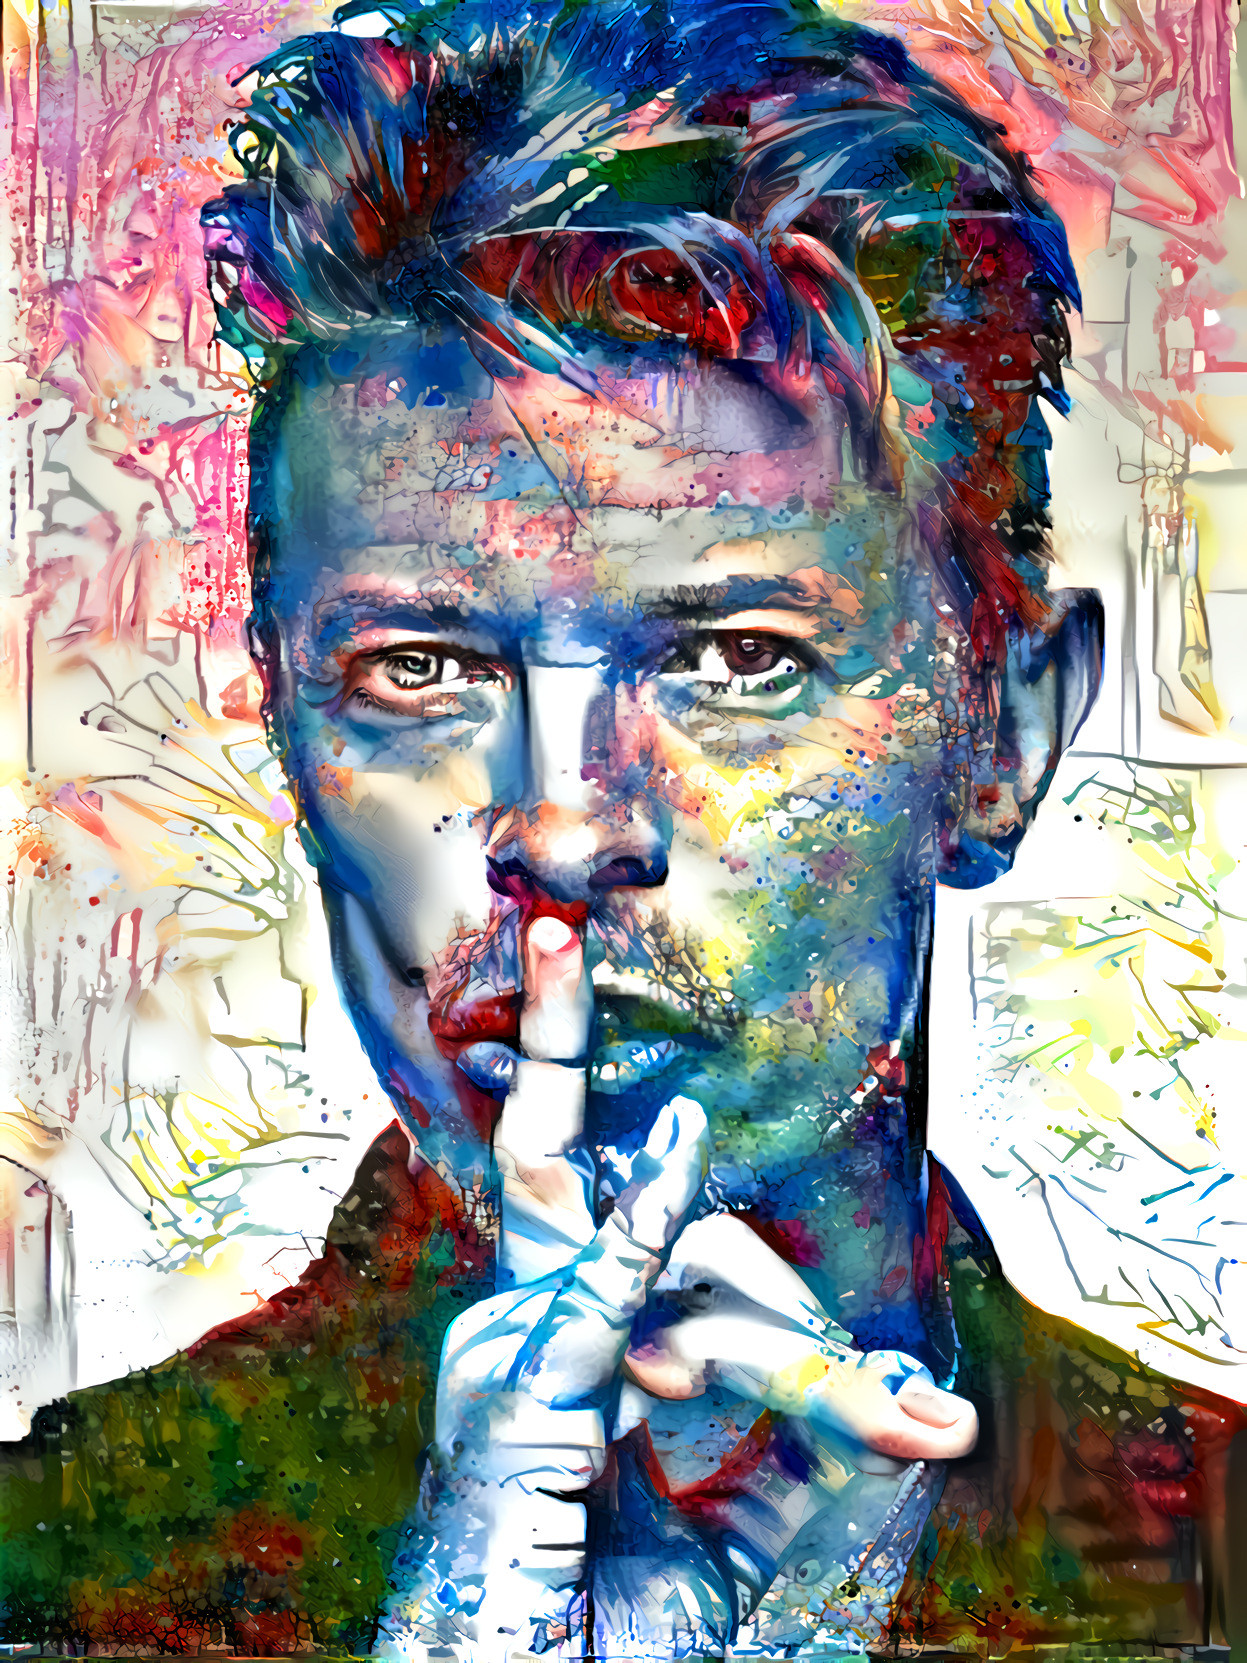 Bowie…”Shhh, Deep Dreaming at play